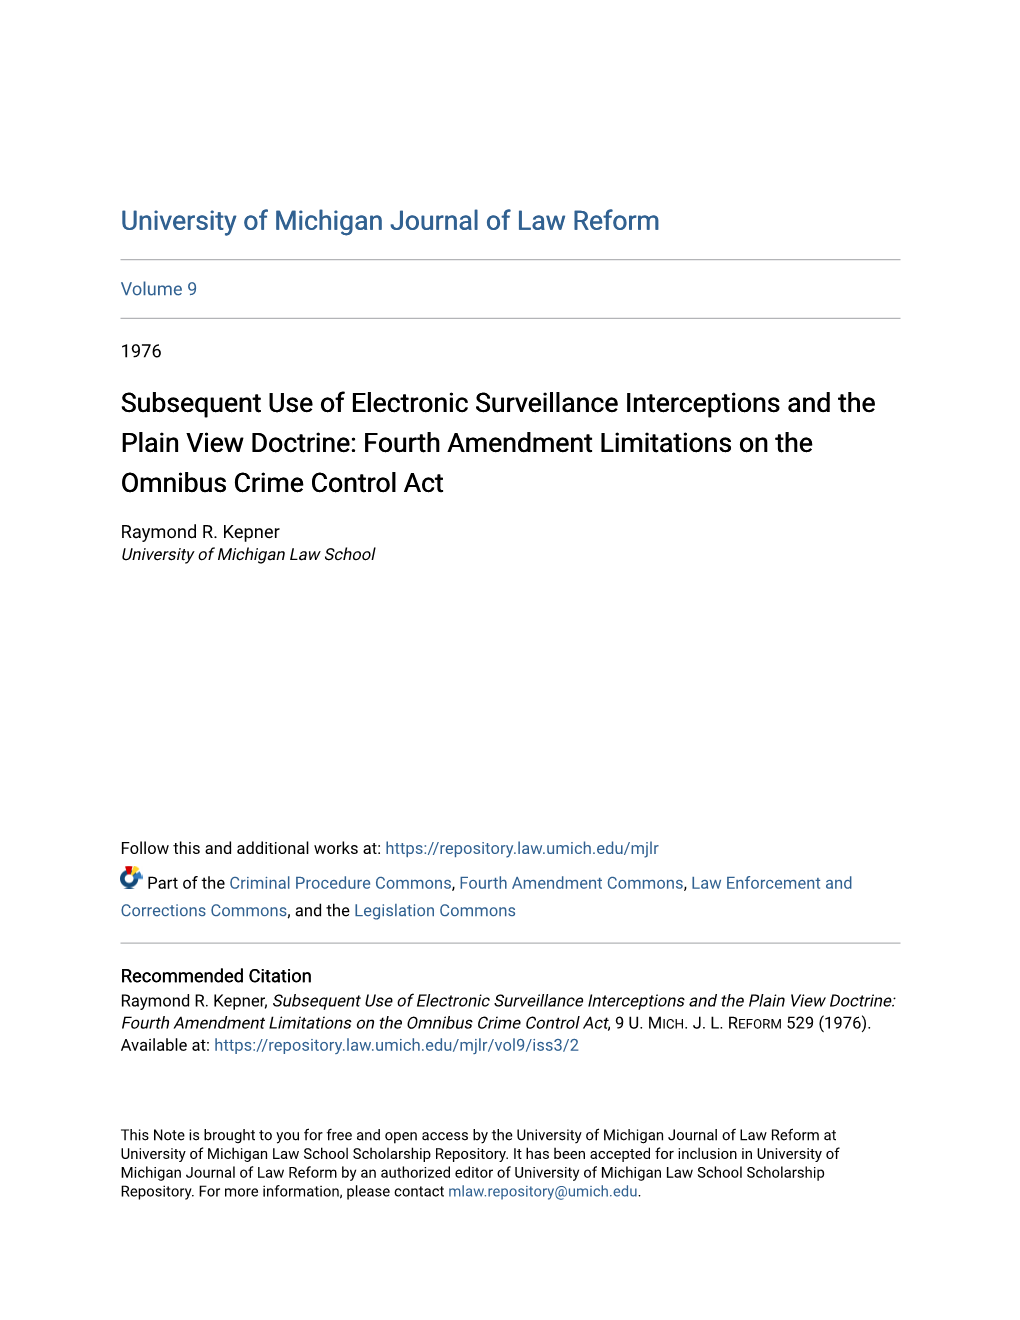 Subsequent Use of Electronic Surveillance Interceptions and the Plain View Doctrine: Fourth Amendment Limitations on the Omnibus Crime Control Act